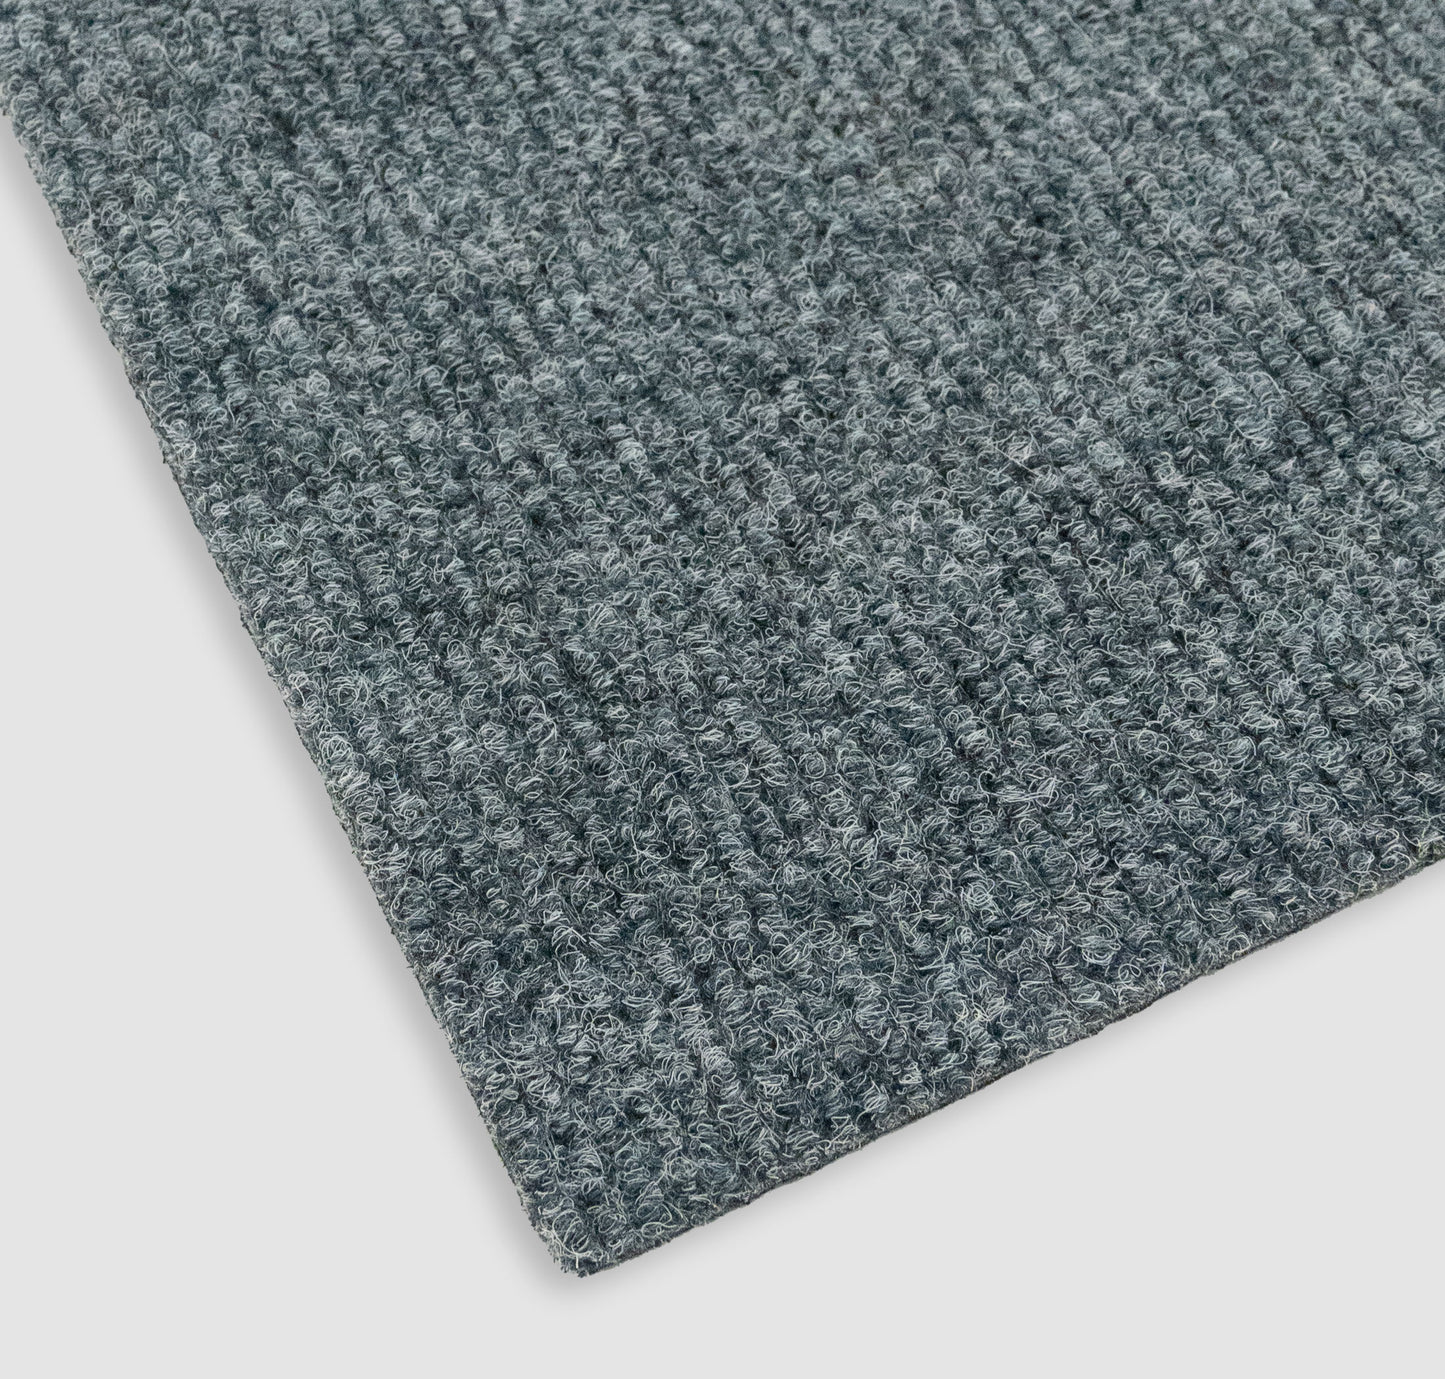 Bedford Rib Contract Sheet Carpet Collection